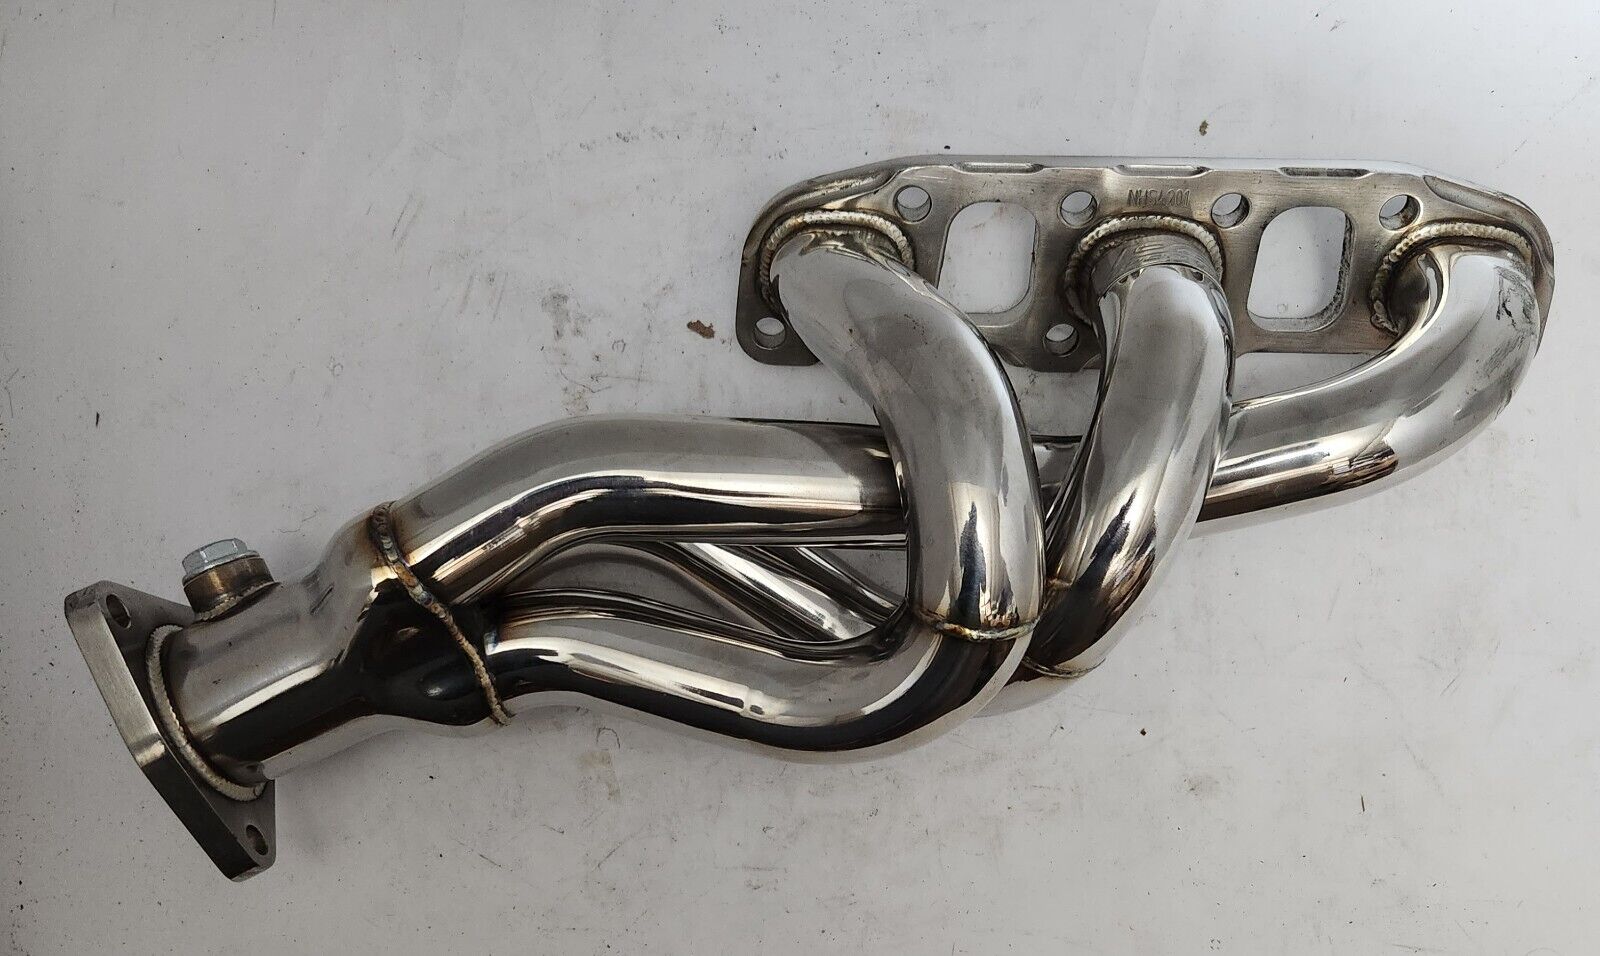 DC Sport - NHS4201 - VQ35DE Stainless Steel Header - for Nissan 350Z - Only One